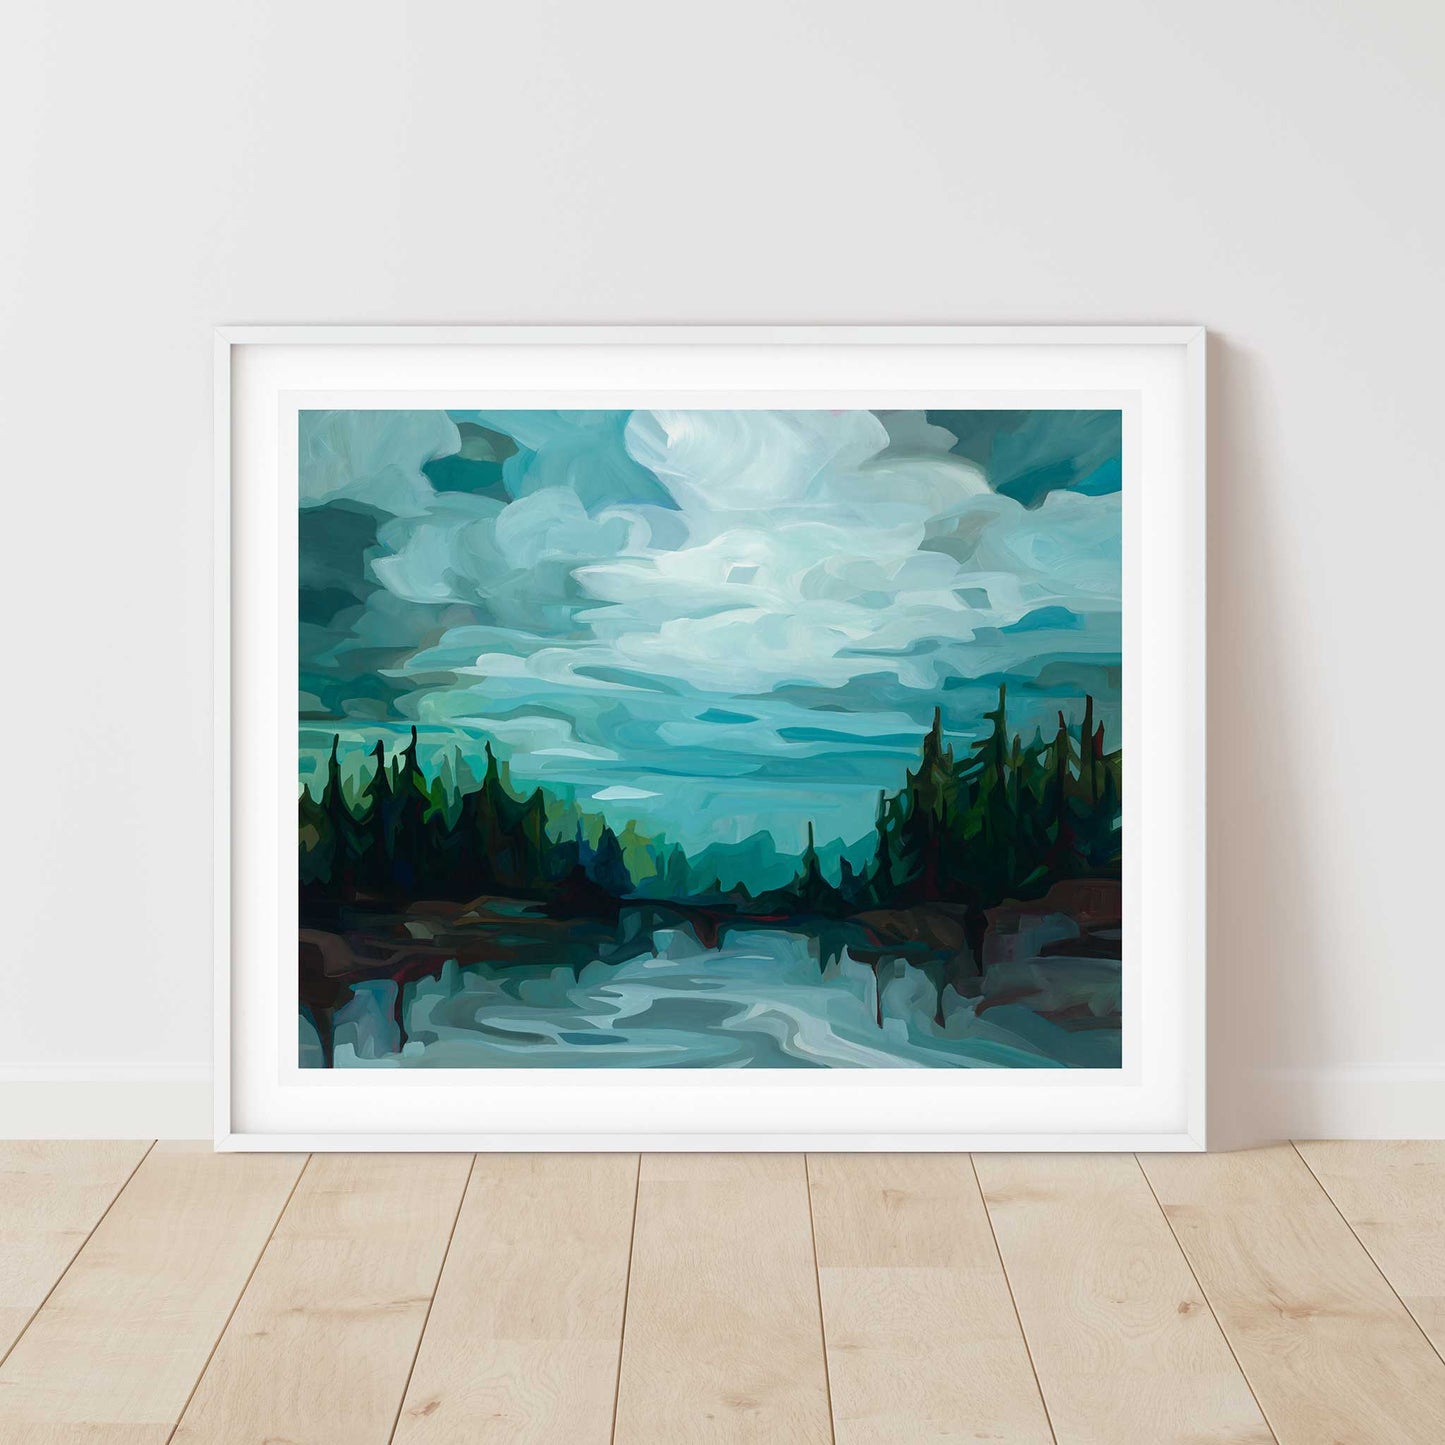 Stormy sky painting fine art print Windermere by Canadian abstract artist Susannah Bleasby